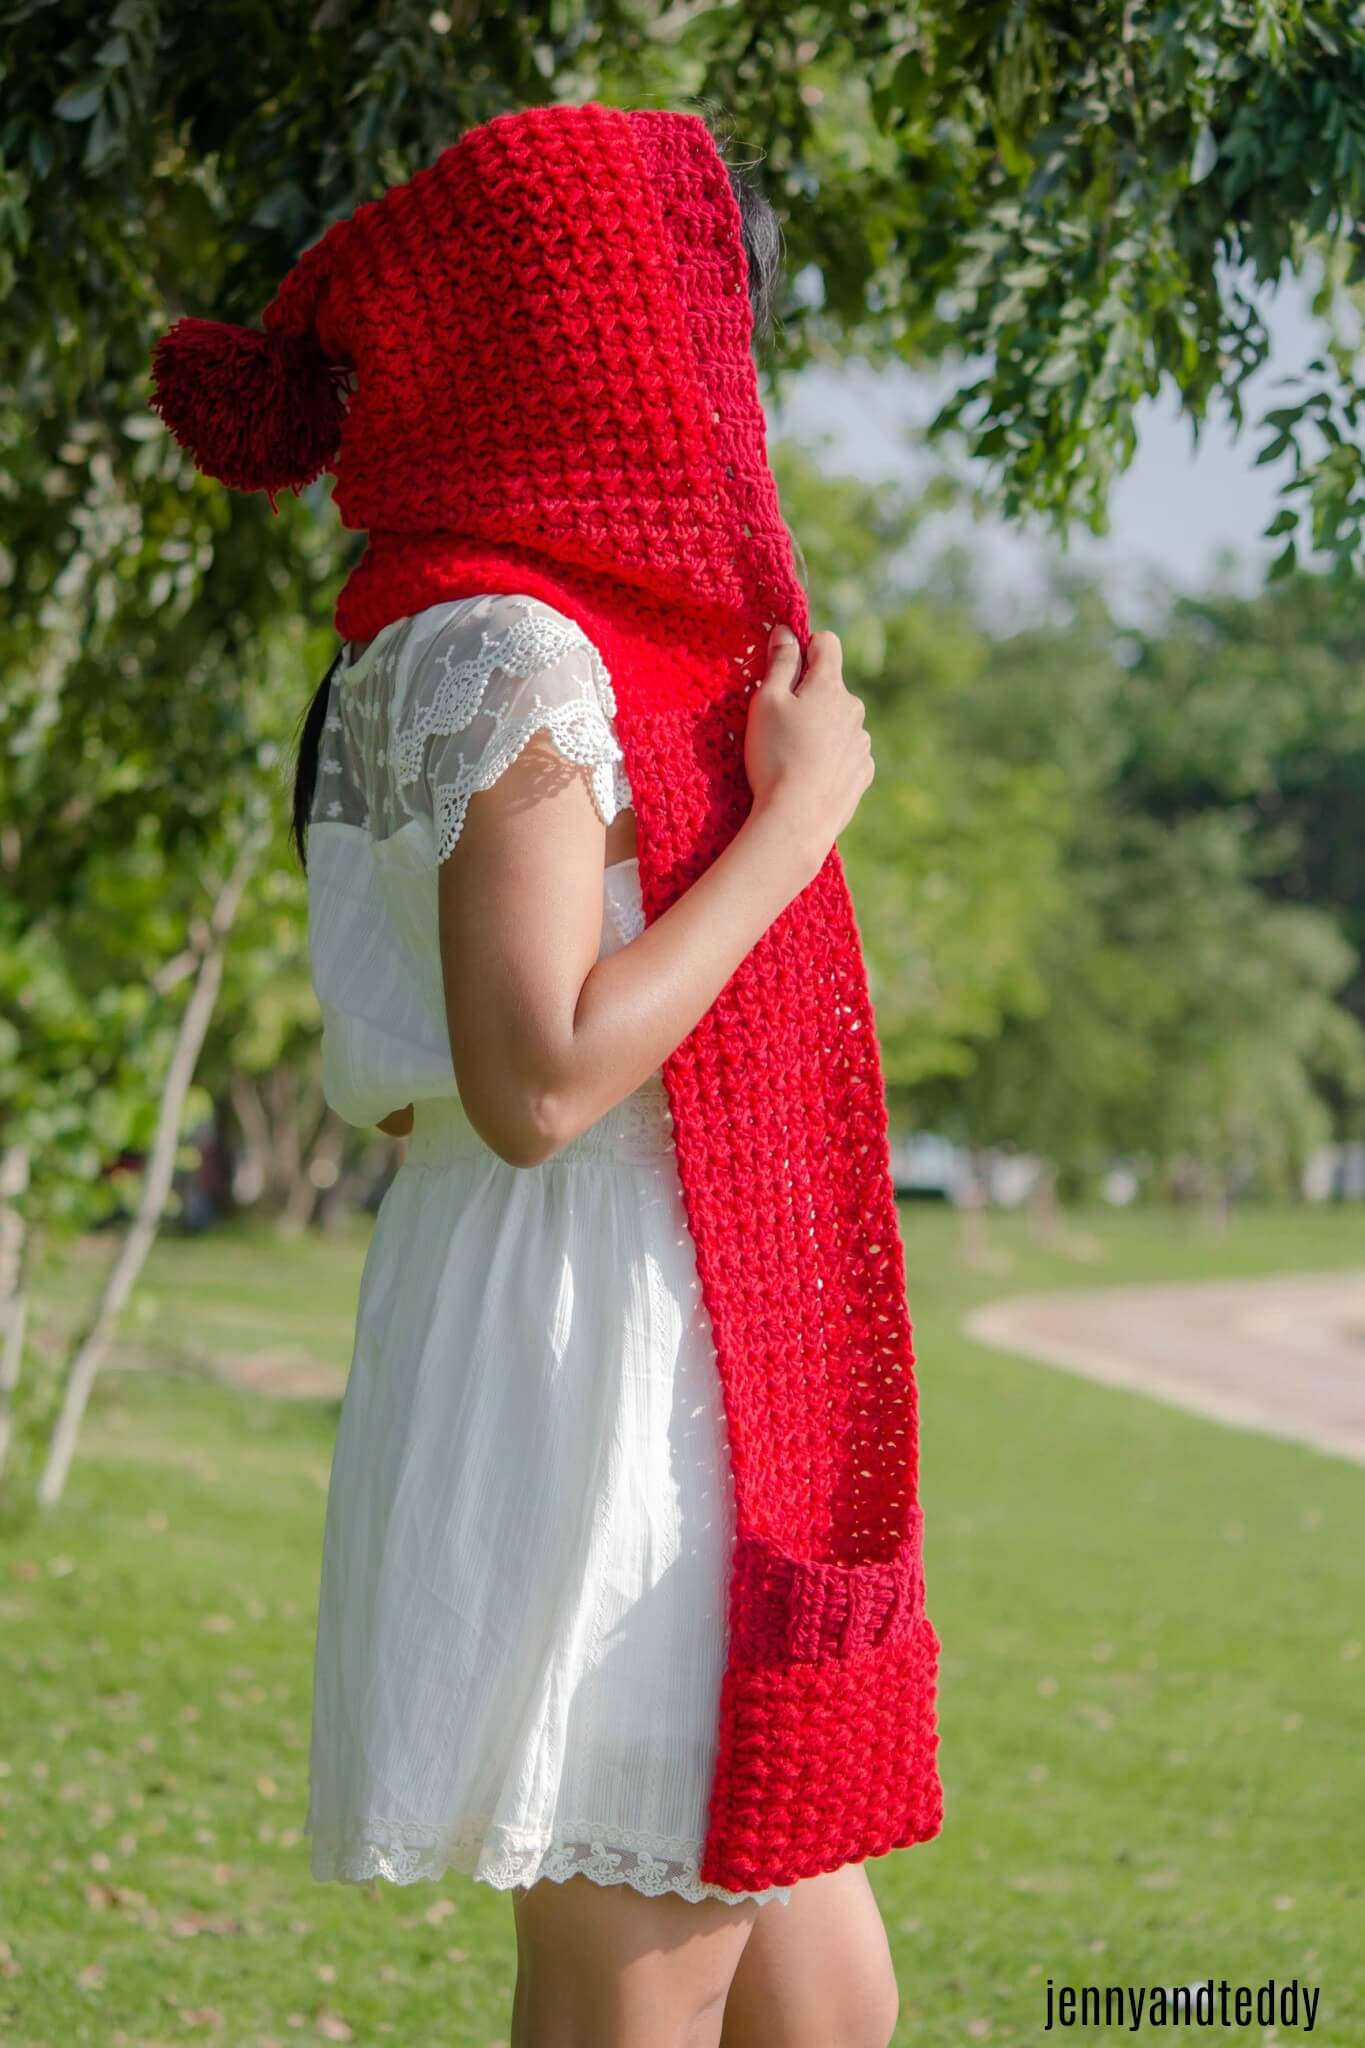 Knitted Hooded Scarf With Pockets Pattern The Red Riding Hood Pocket Scarf Free Crochet Pattern